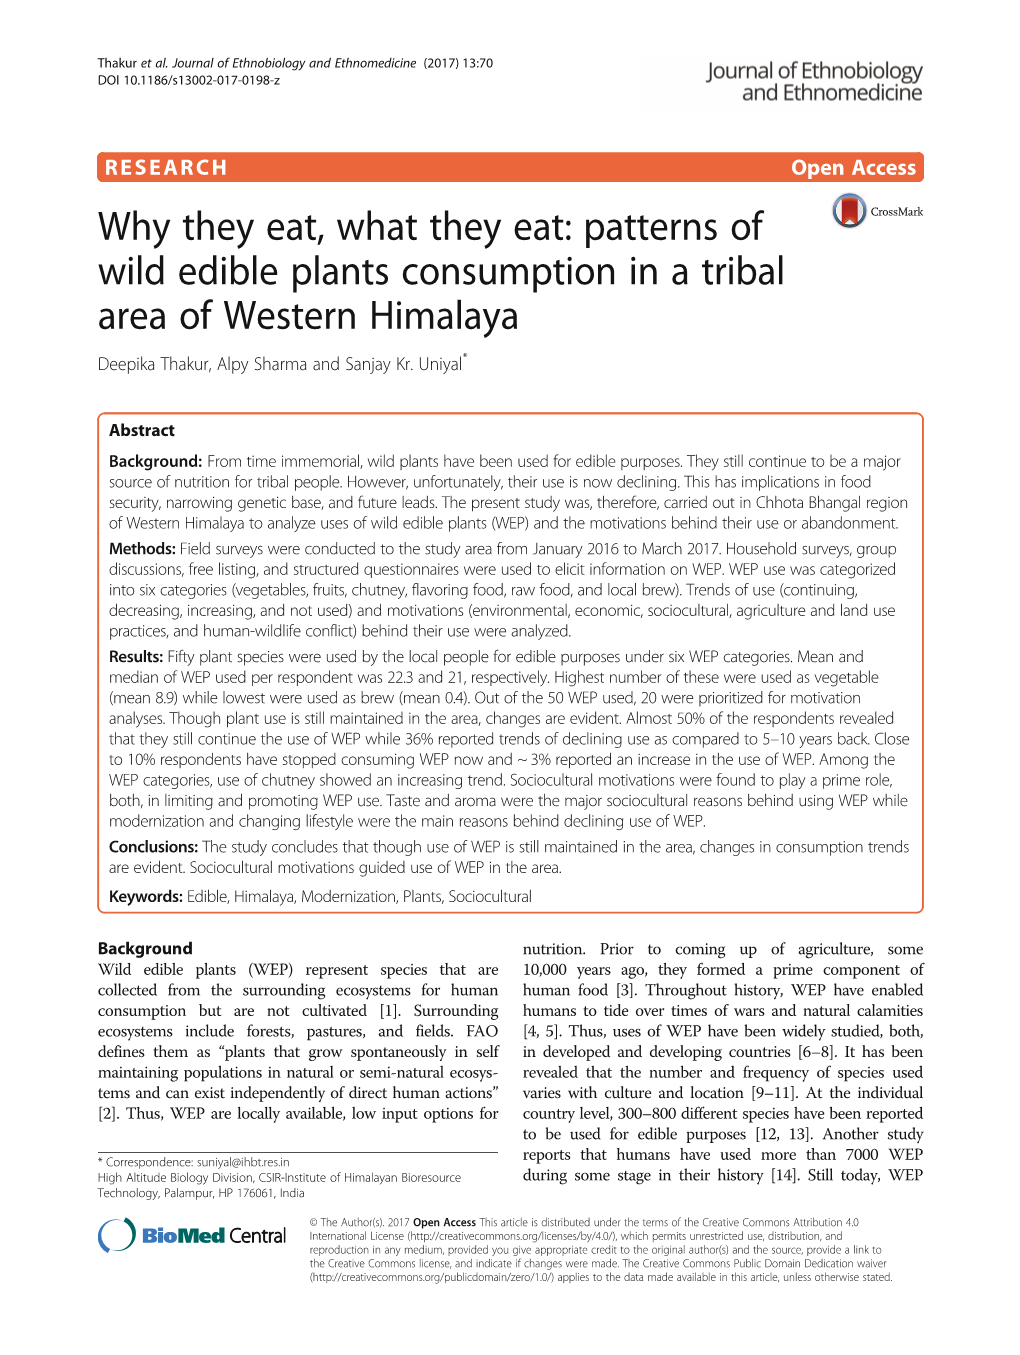 Patterns of Wild Edible Plants Consumption in a Tribal Area of Western Himalaya Deepika Thakur, Alpy Sharma and Sanjay Kr